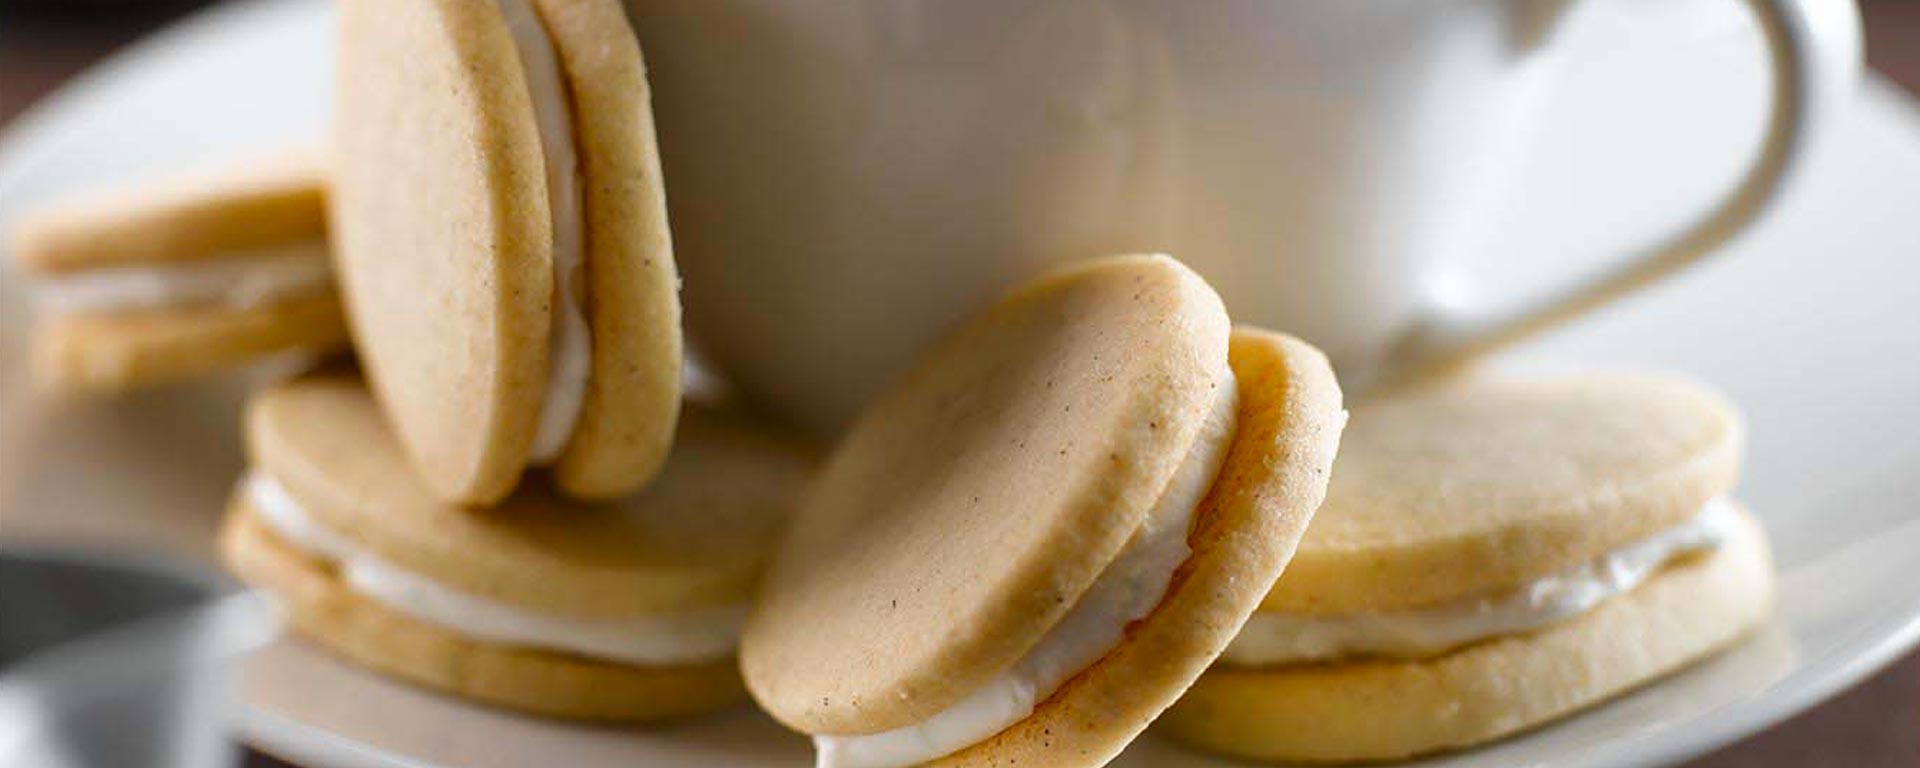 Photo for - Cardamom and Lime Sandwich Cookies with Chai Floating Islands